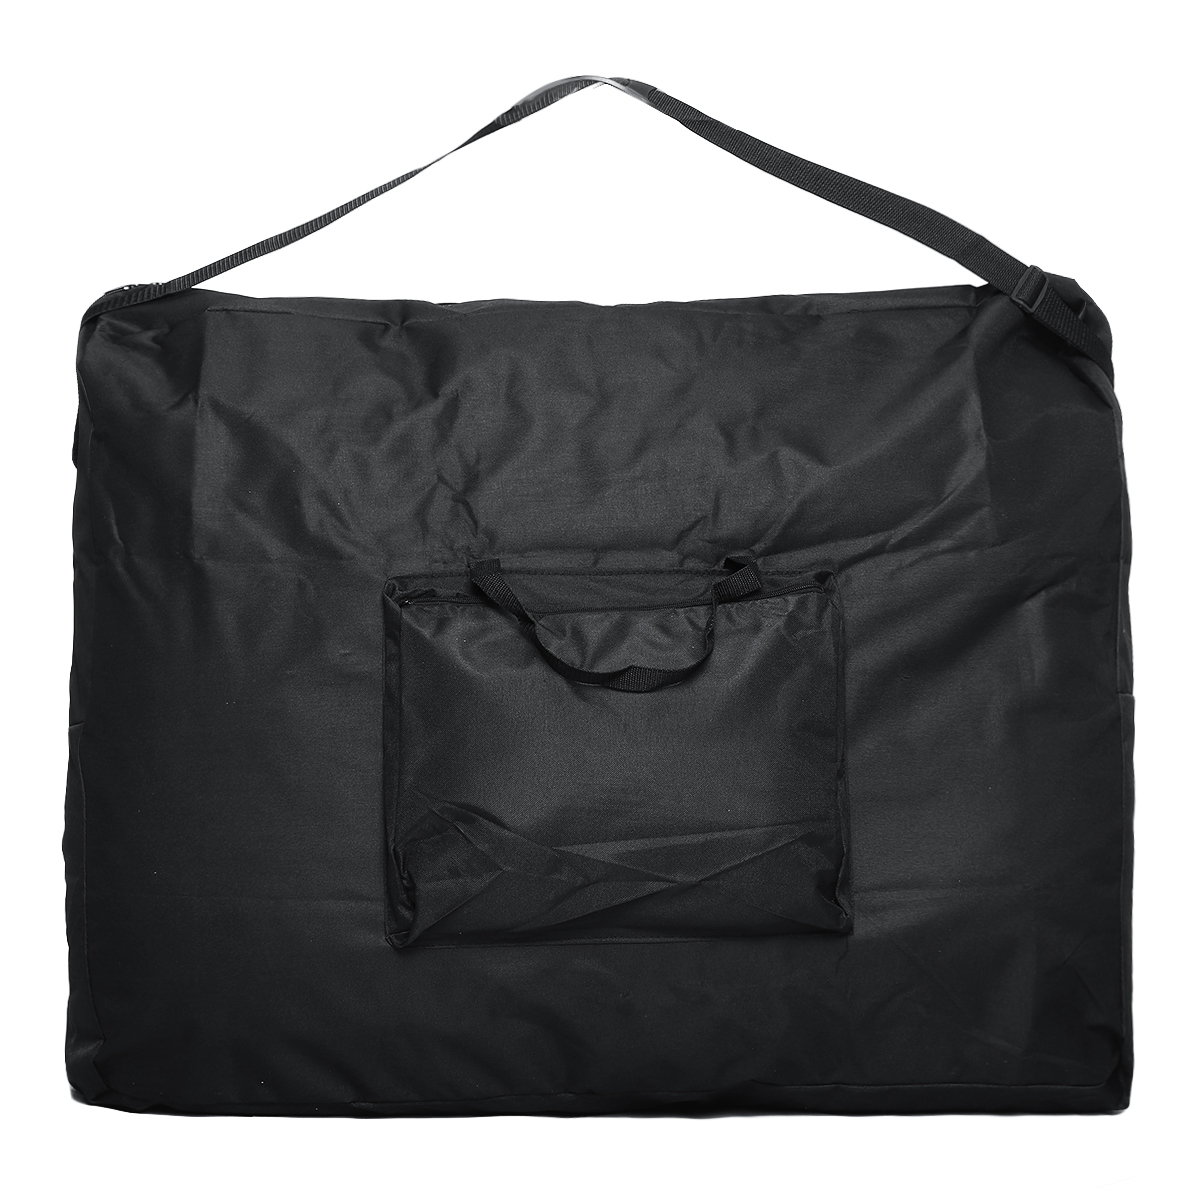 Portable Carry Bag For Folding Massage Couch Therapy Table Beauty Bed Bag Case